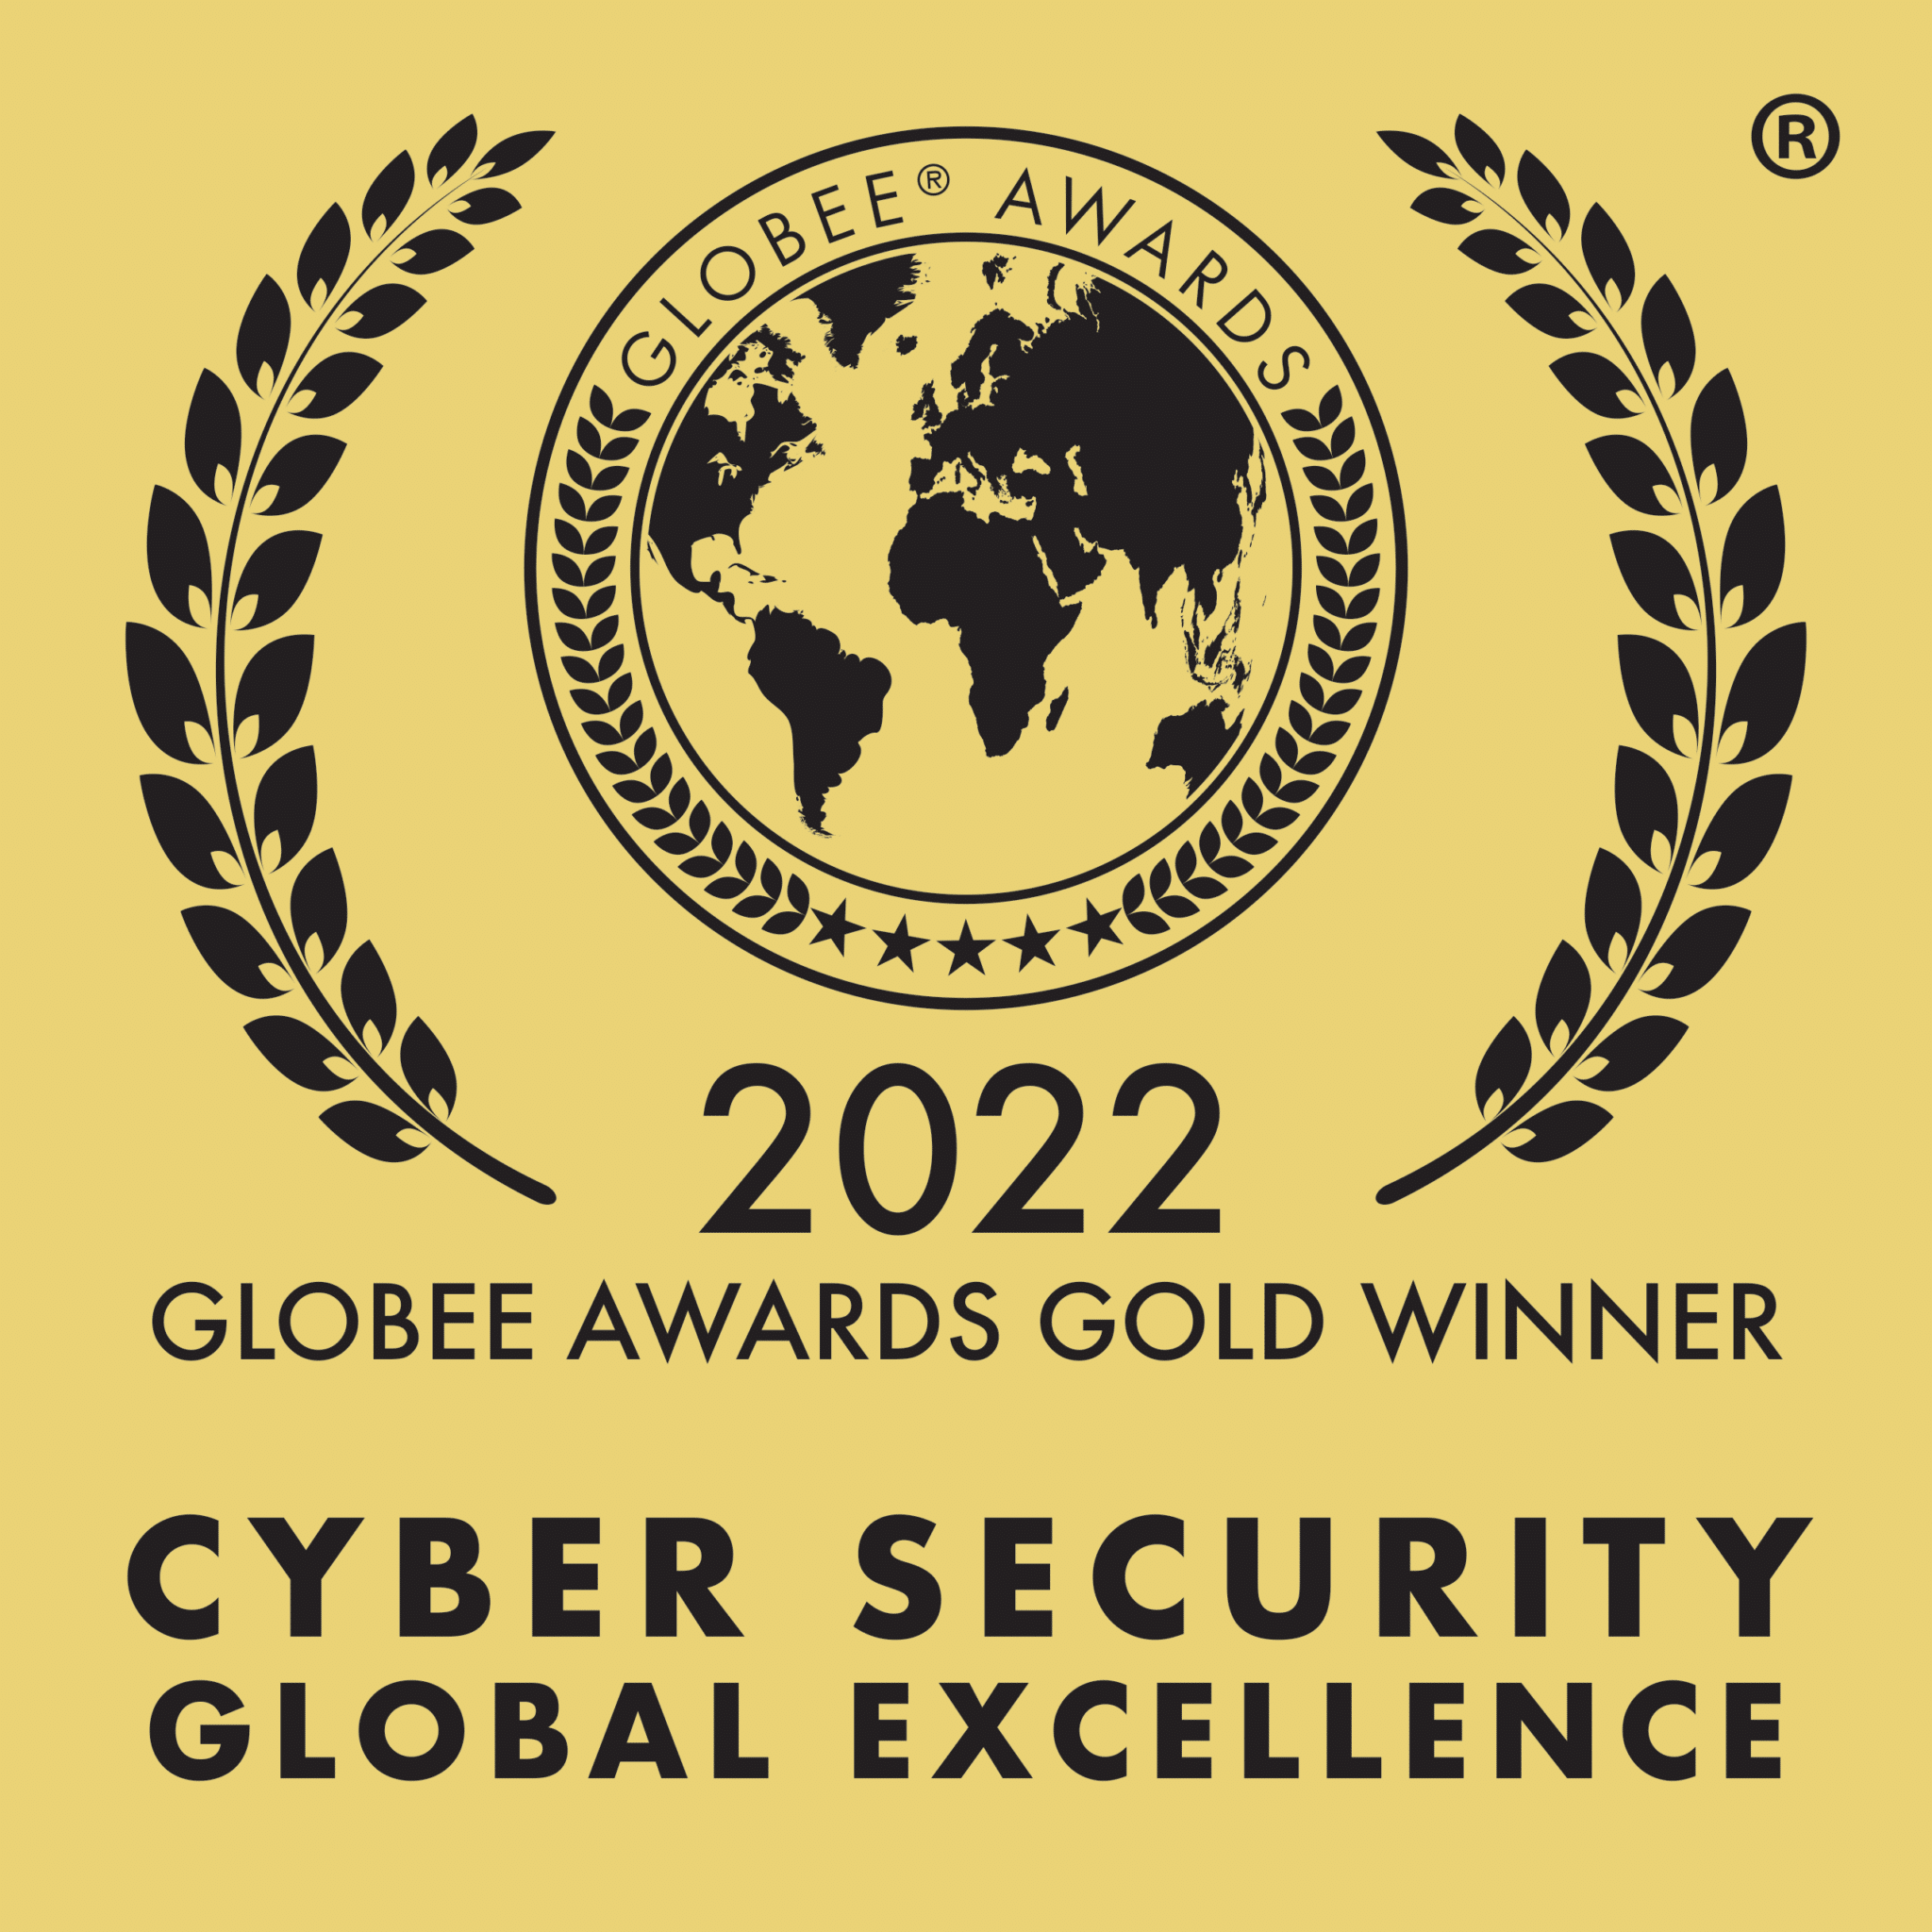 Cyber Security Global Excellence award badge